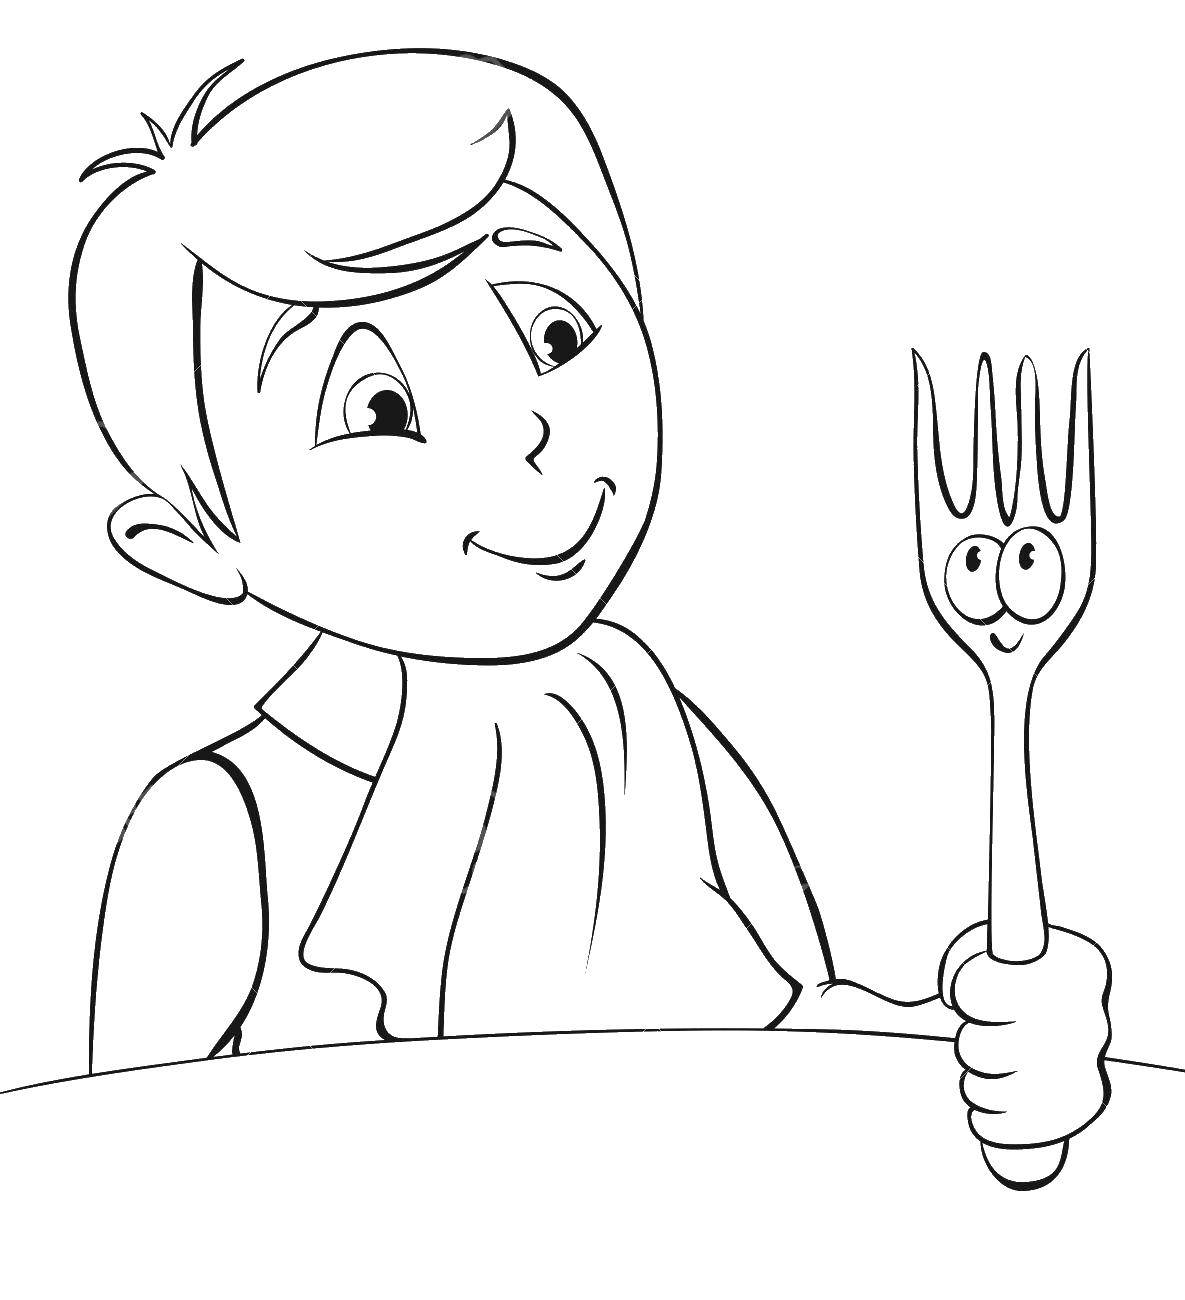 Coloring The guy with the fork. Category the contour of the boy. Tags:  Boy, fork.